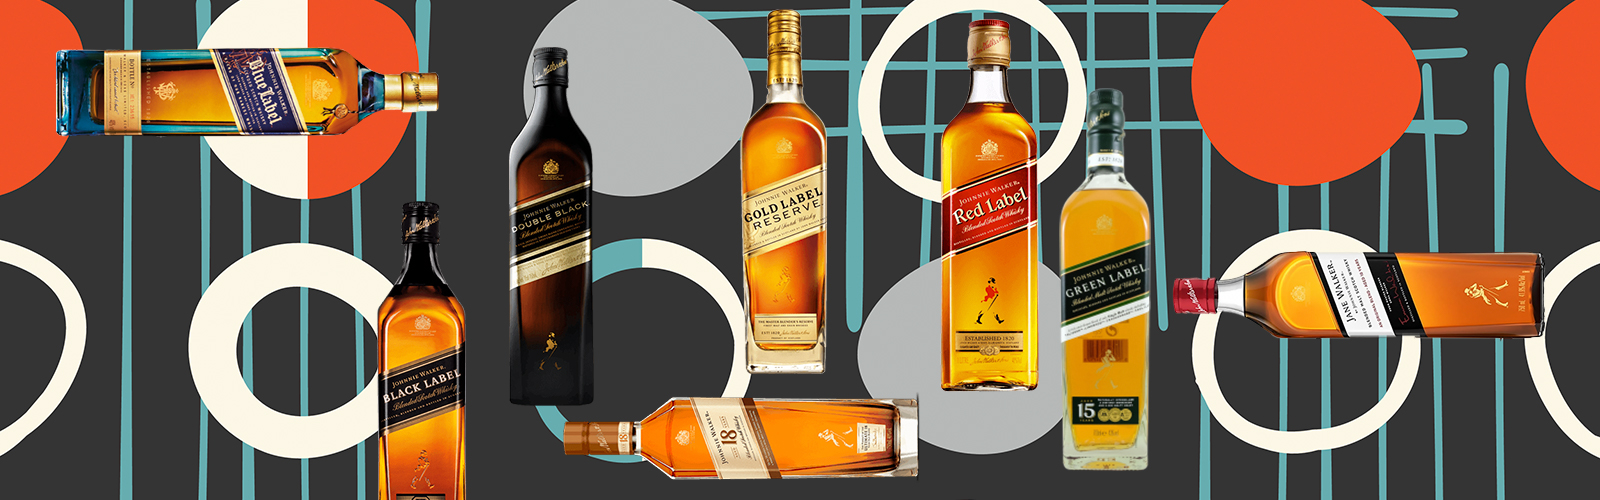 14 Things You Didn't Know Know About Johnnie Walker